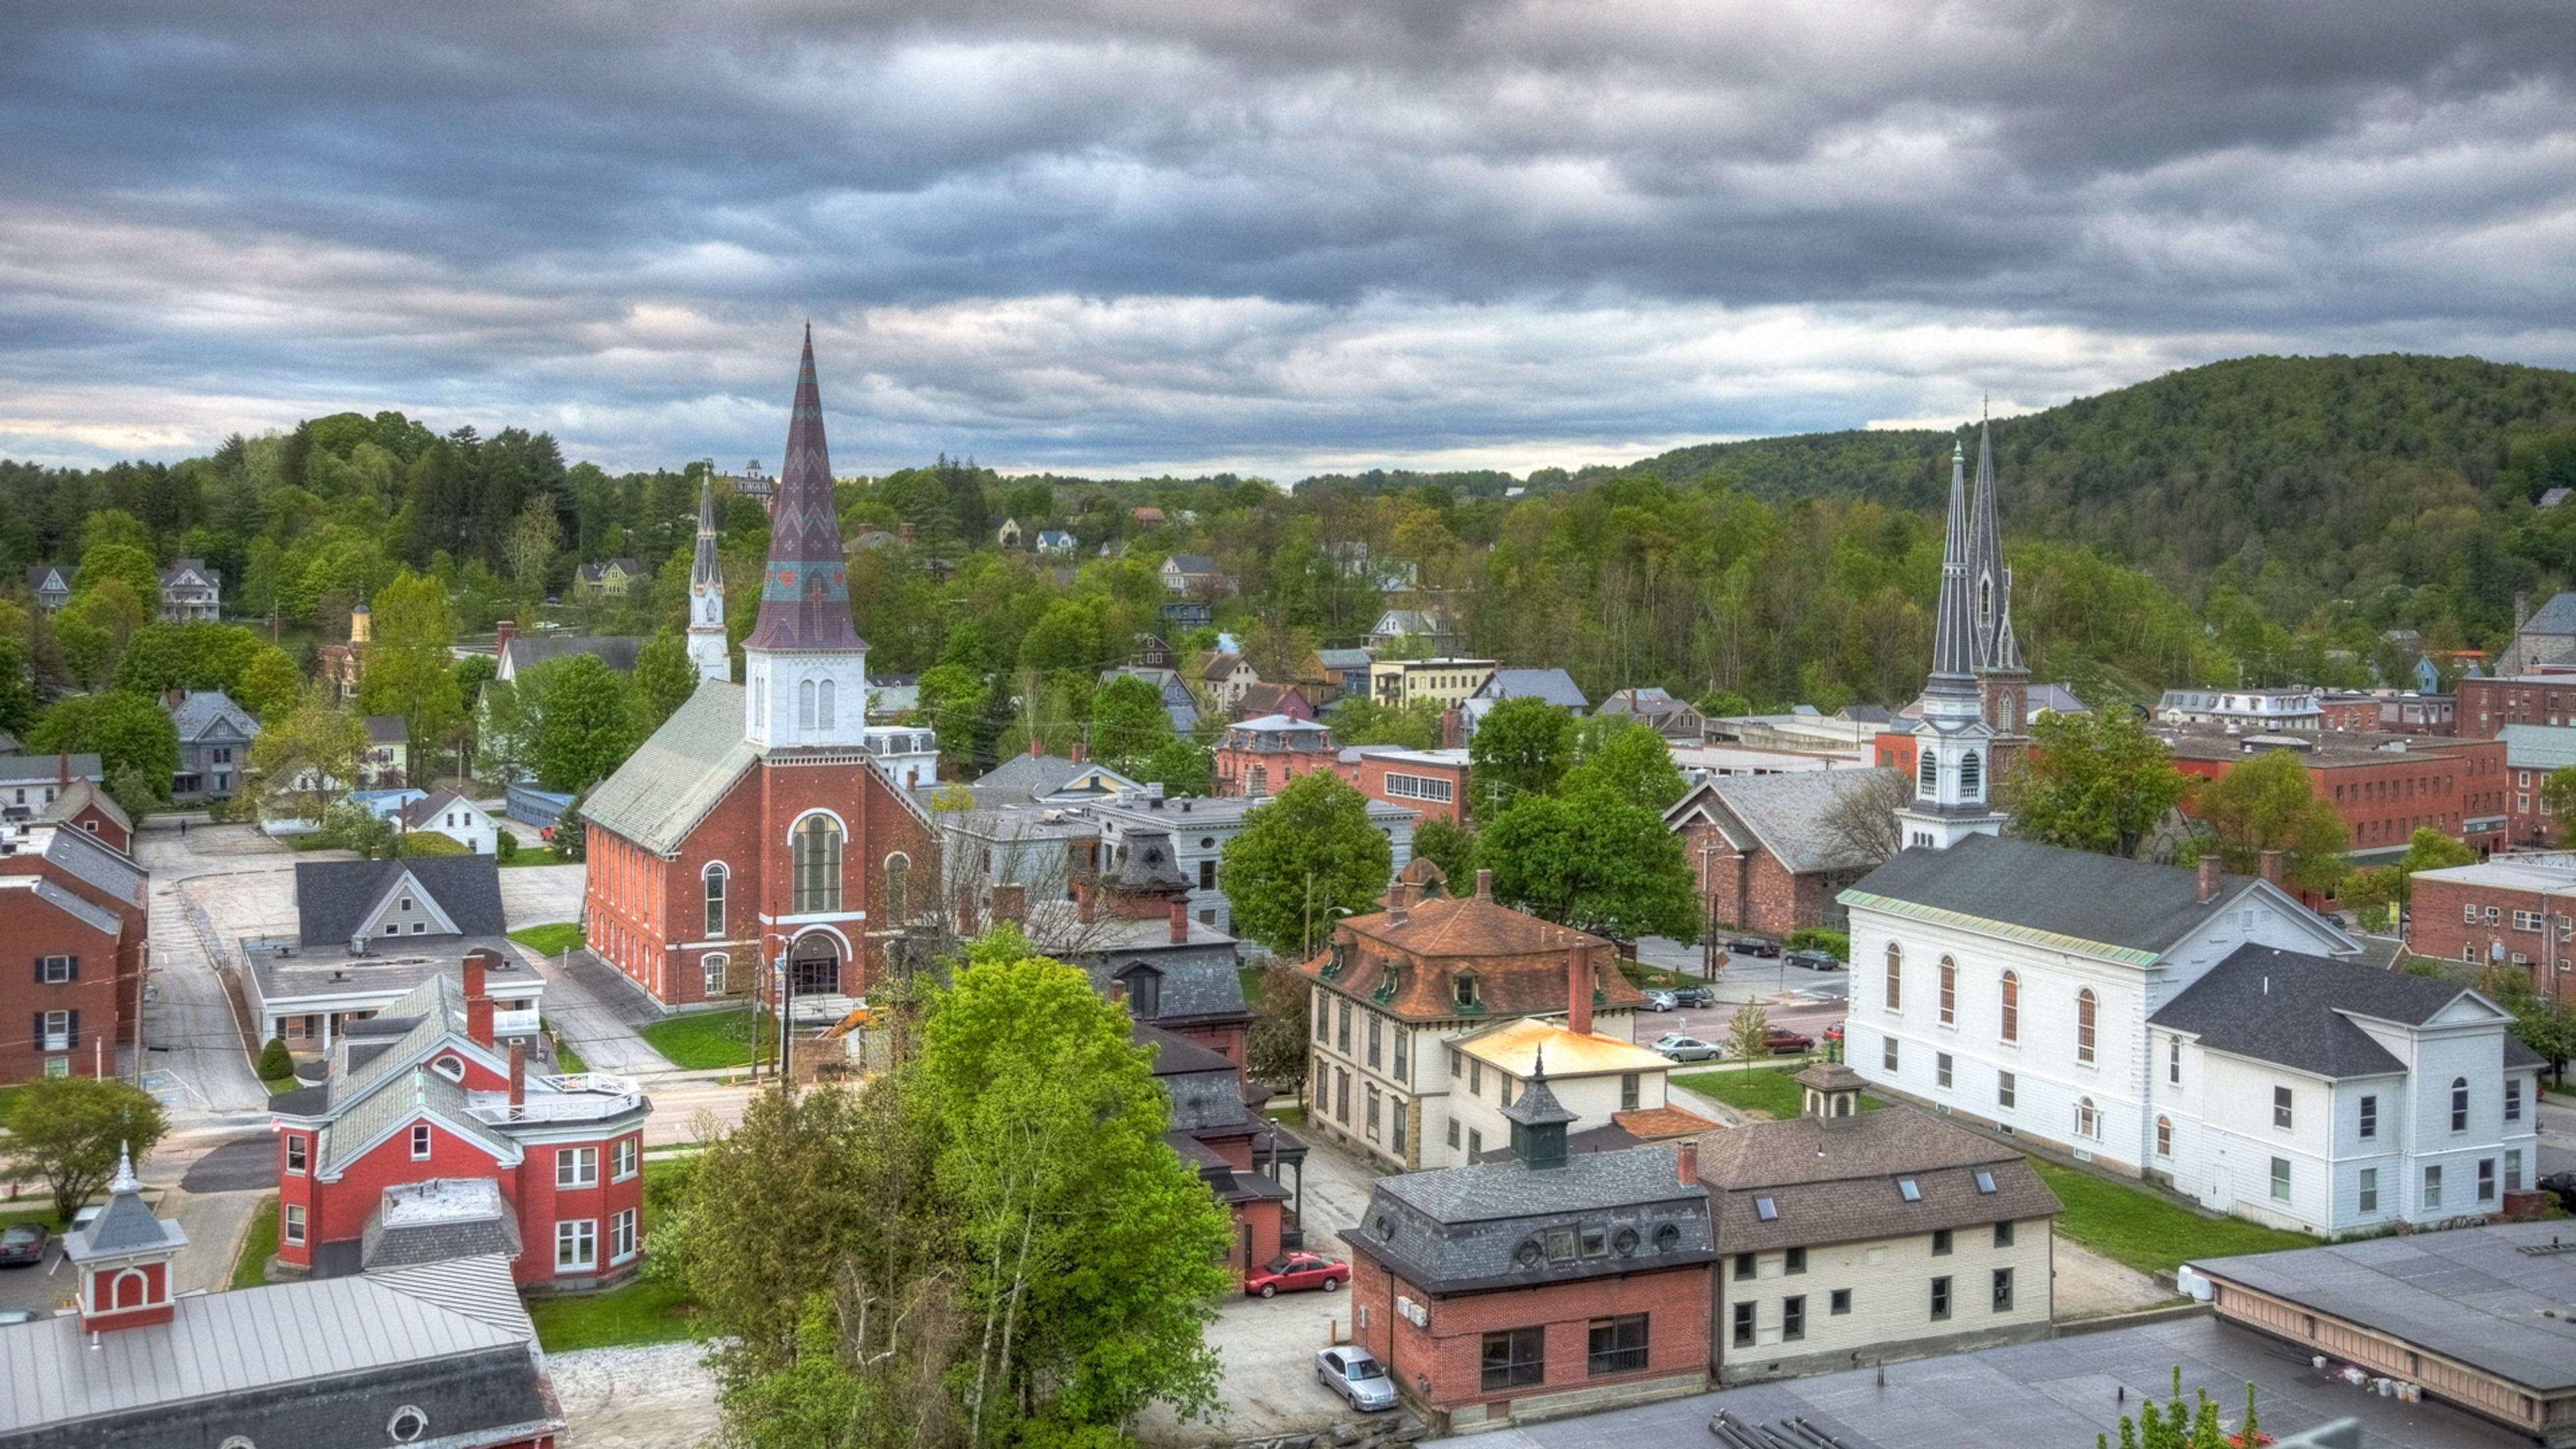 You can get up to $7,500 if you move to Vermont for work